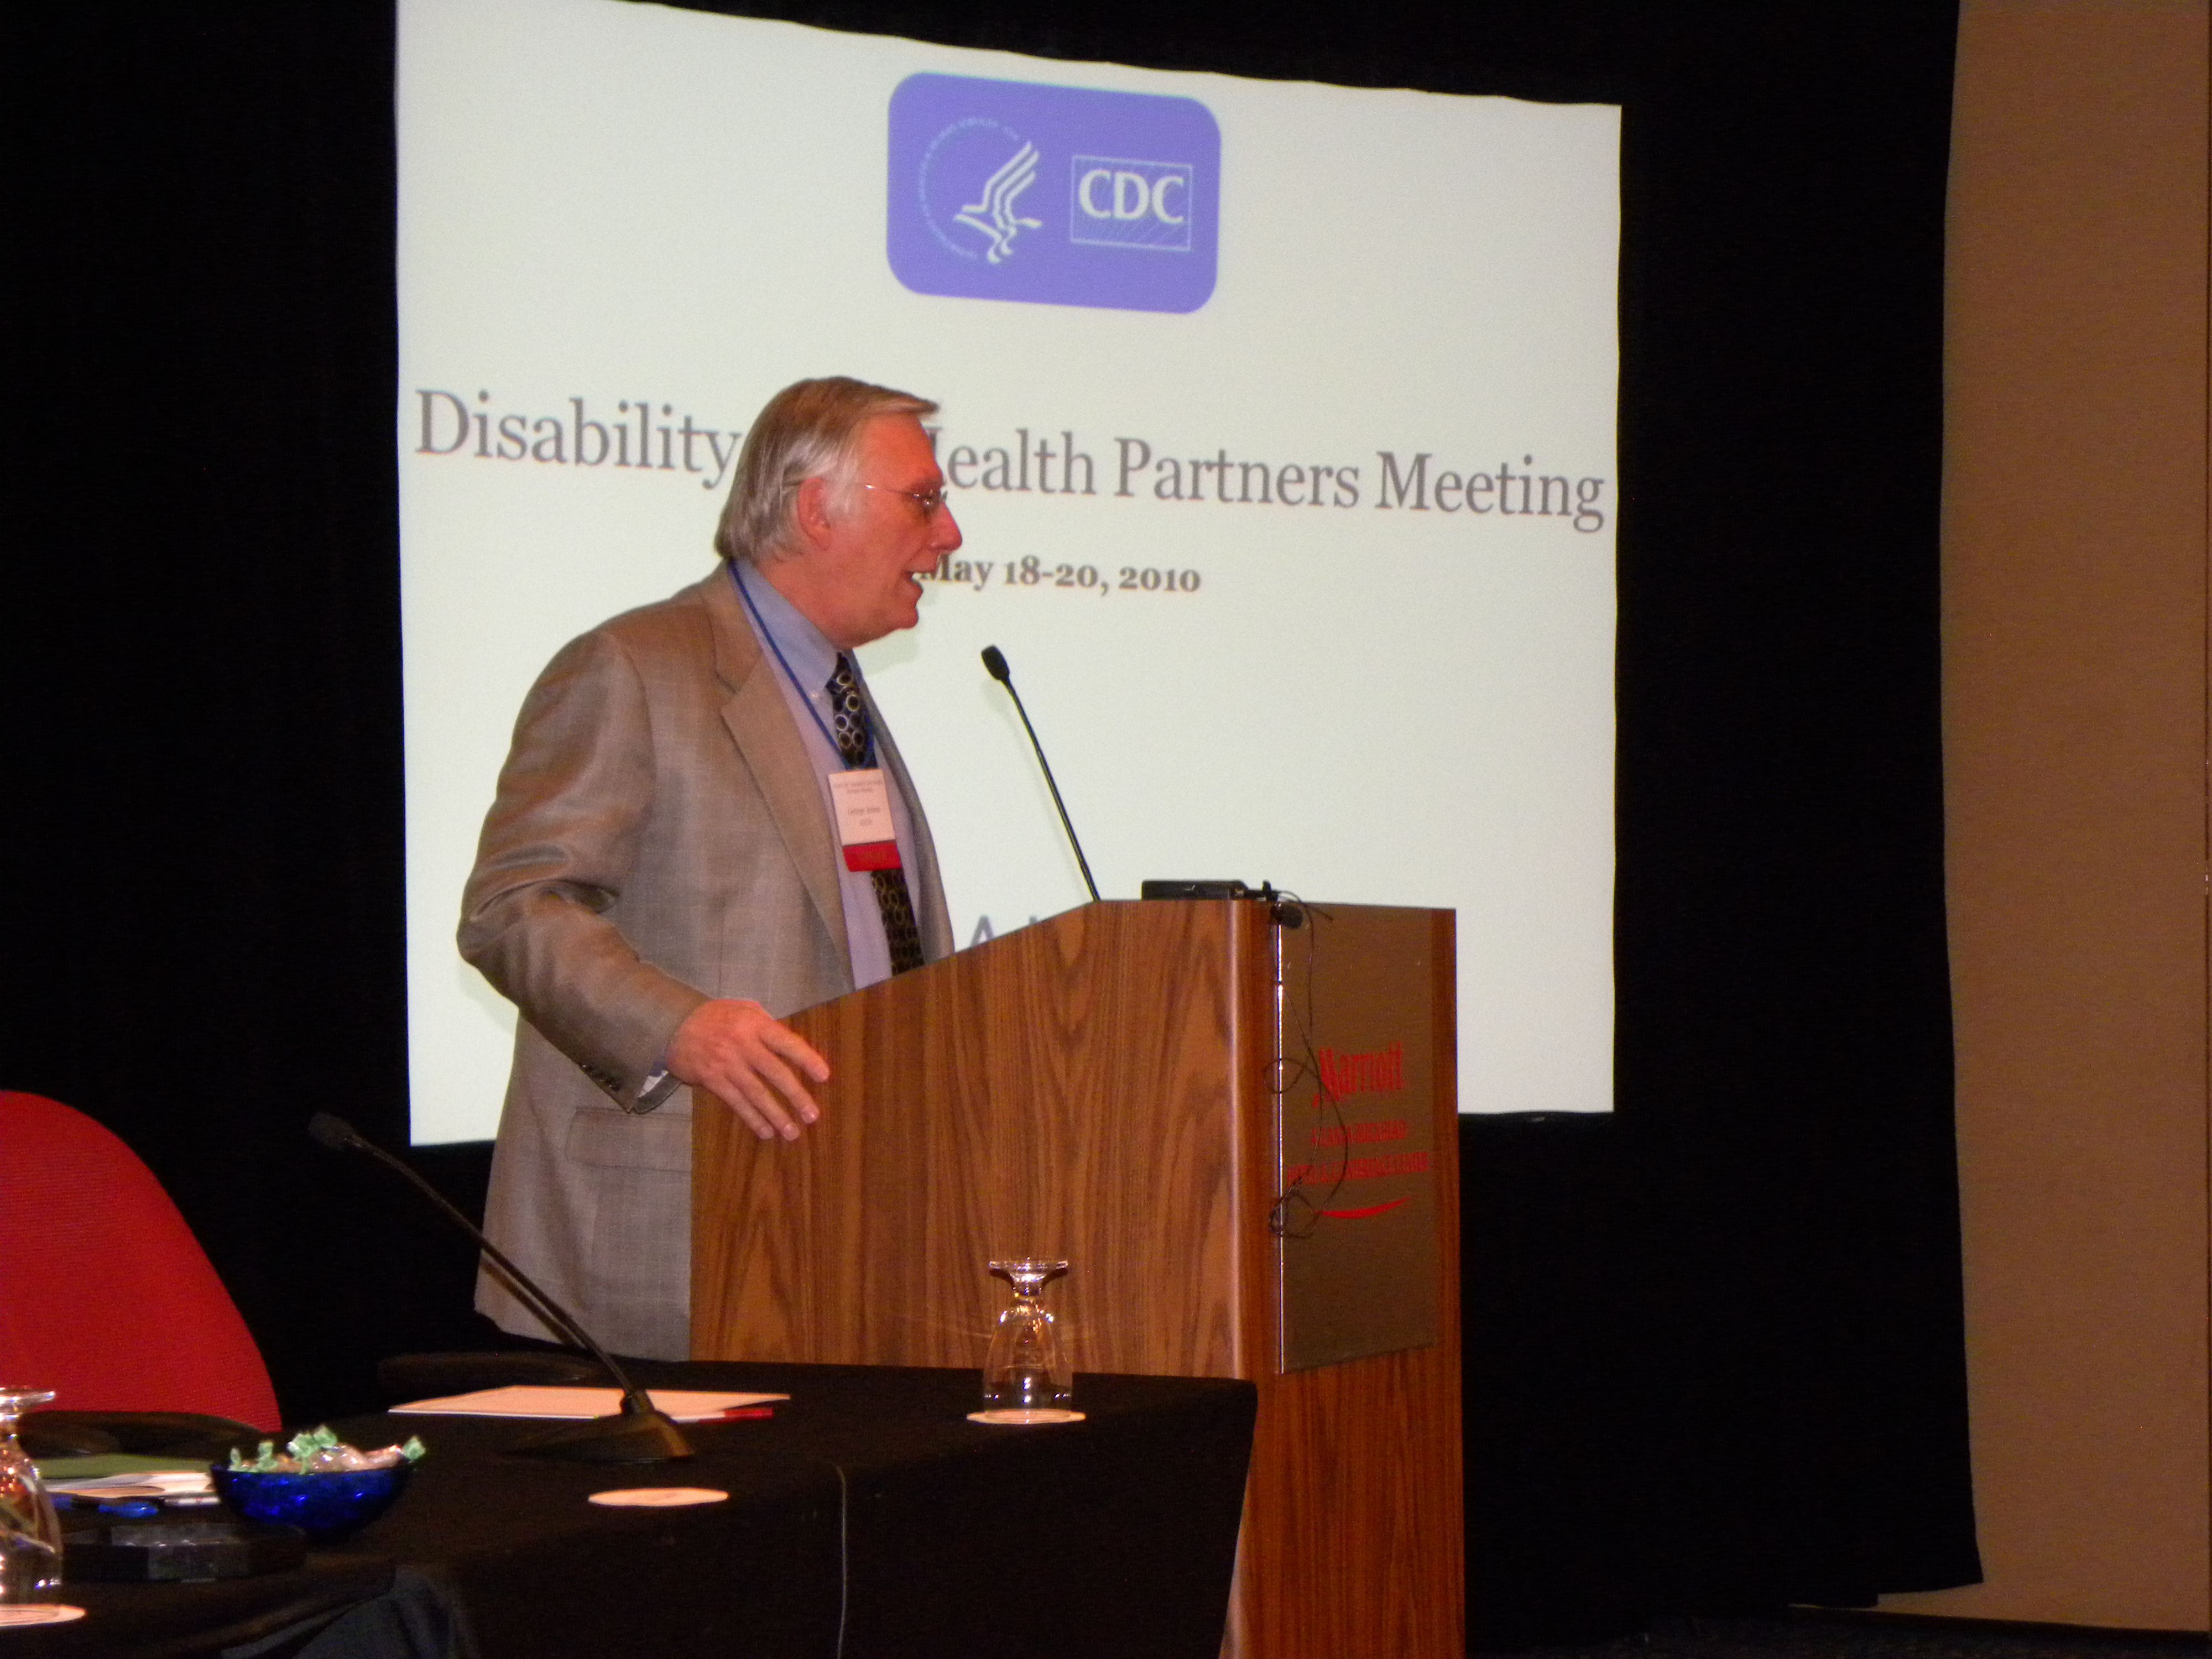 2010 Disability and Health Partners Meeting Proceedings Available